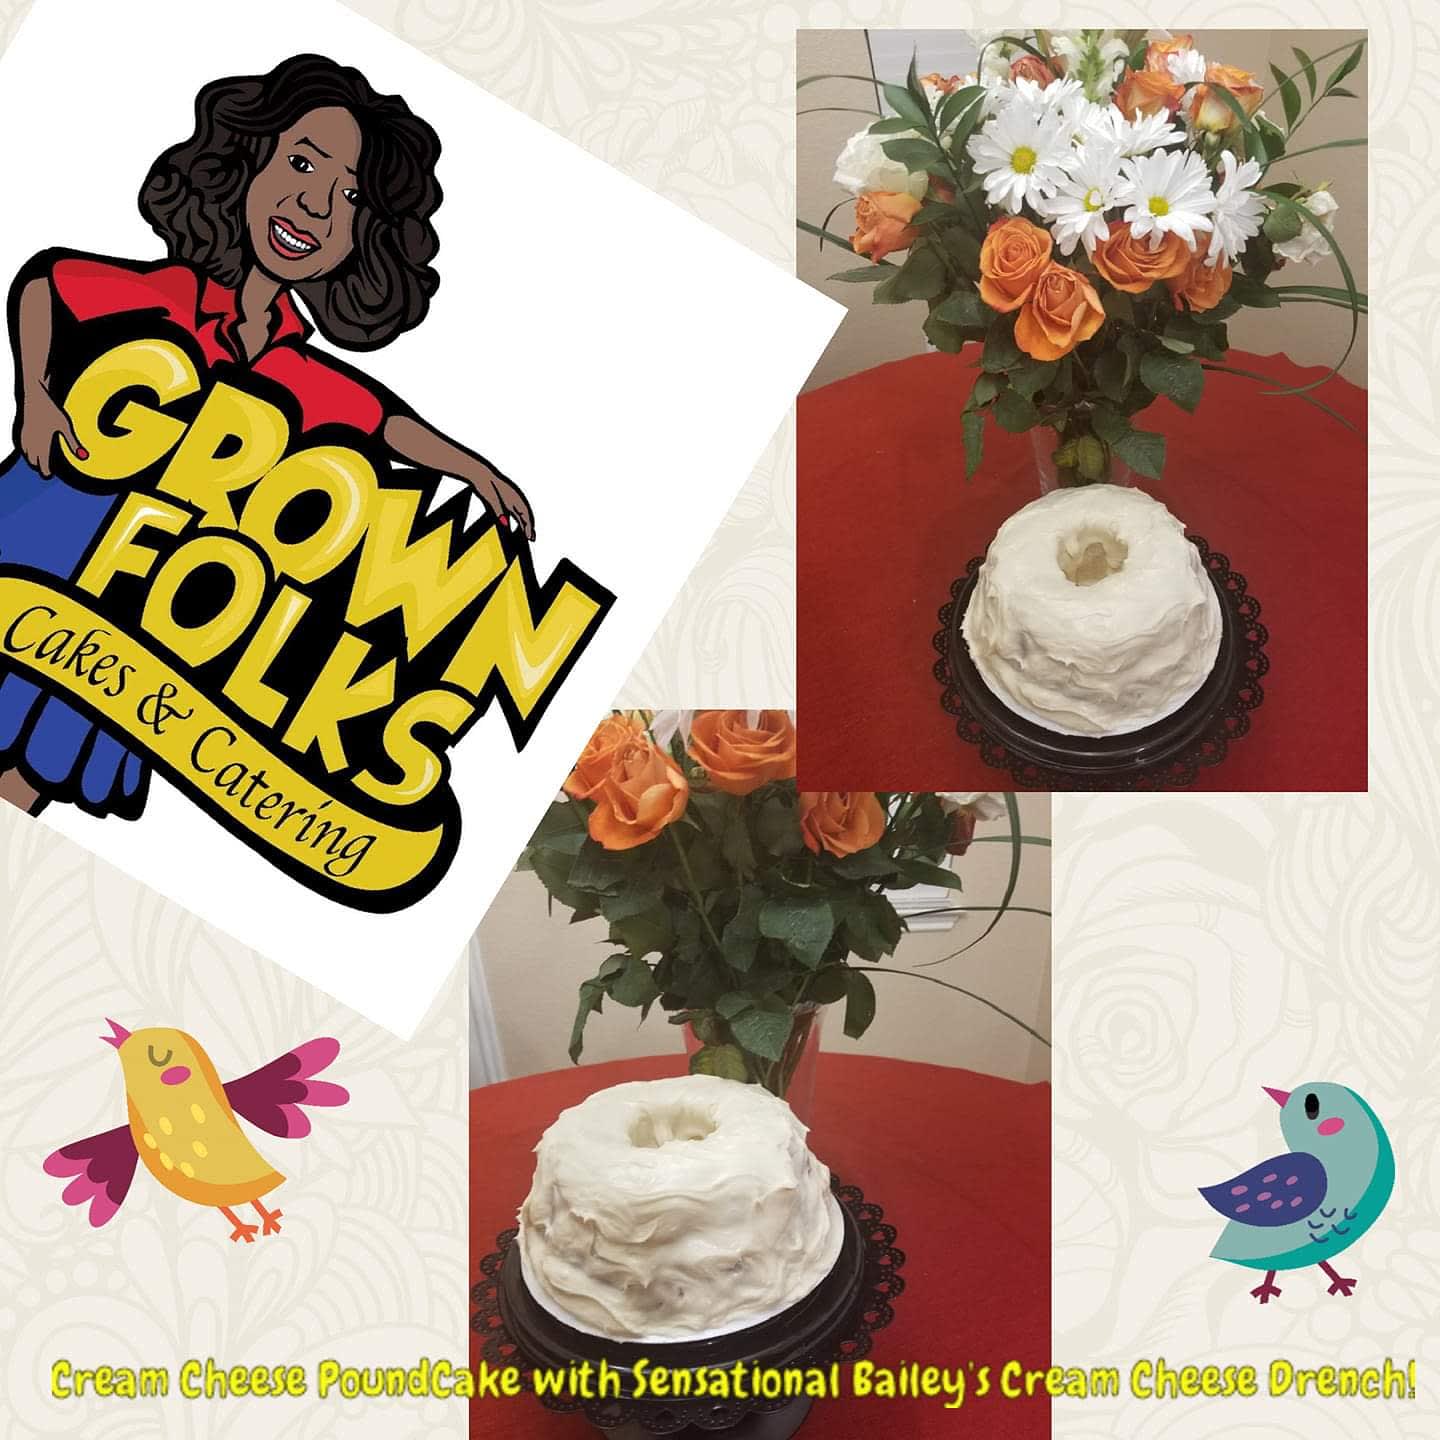 Grown Folks Cakes and Catering